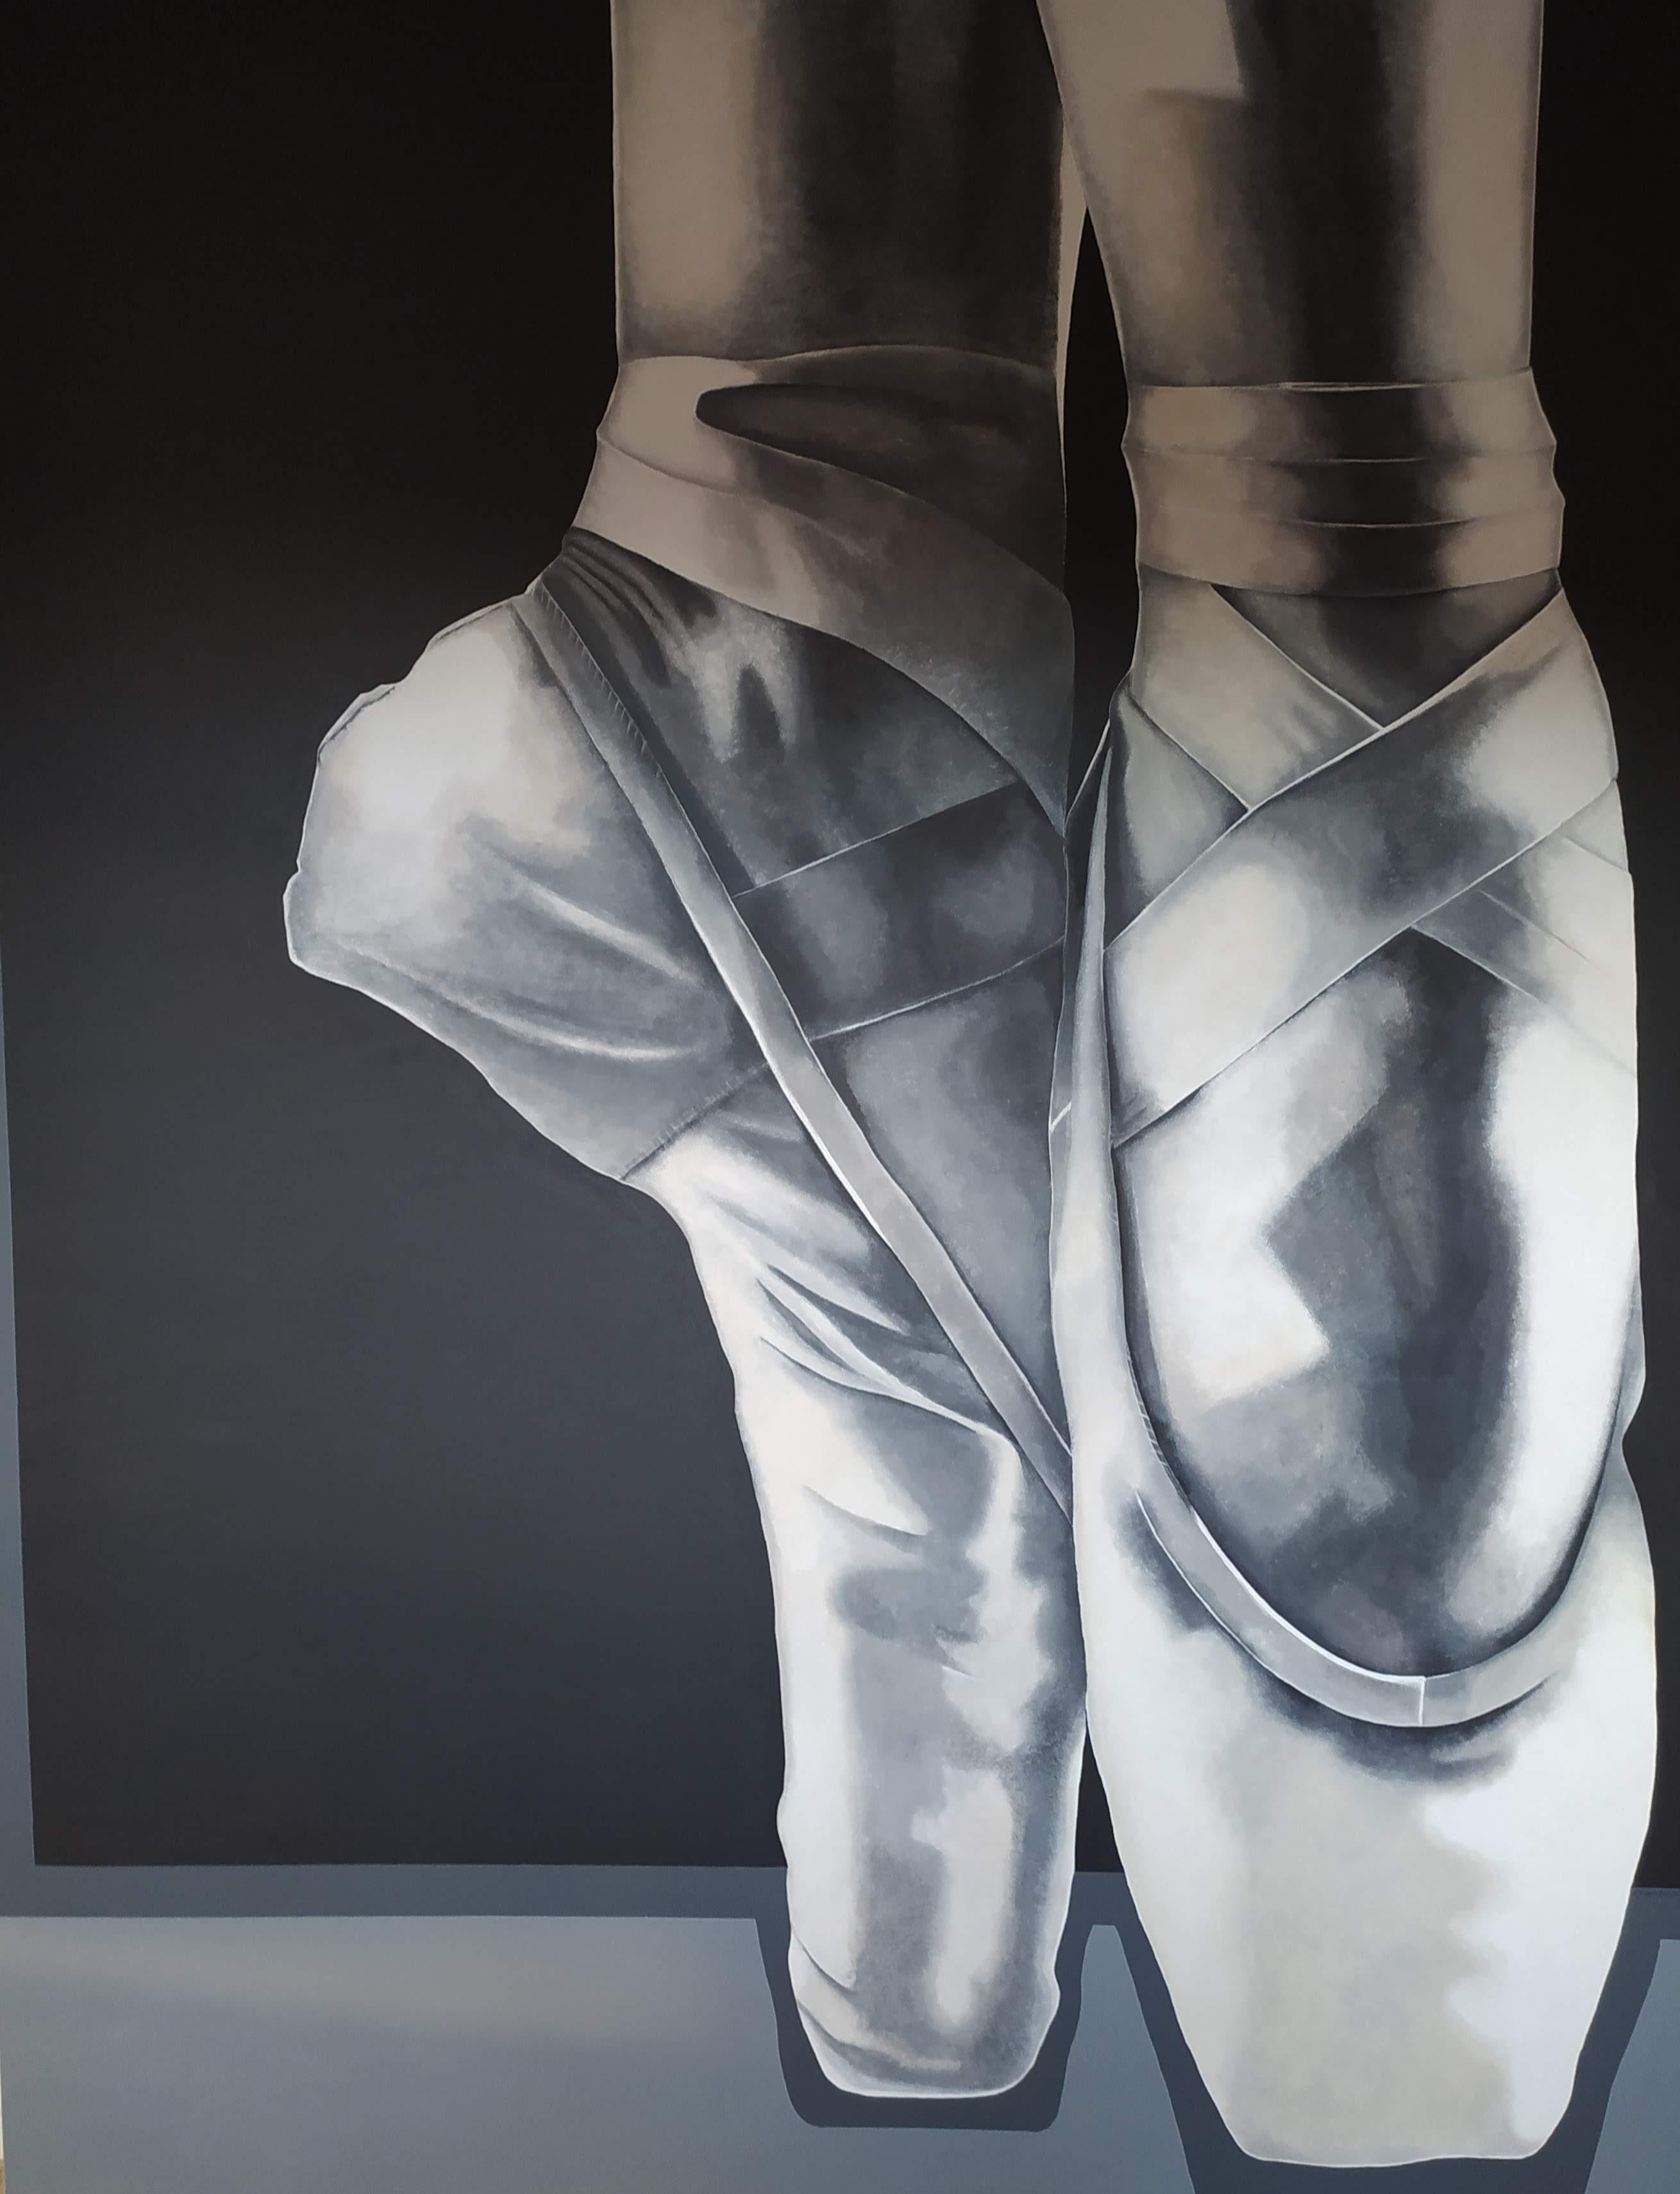 Pointes - Painting by Elina Bilous